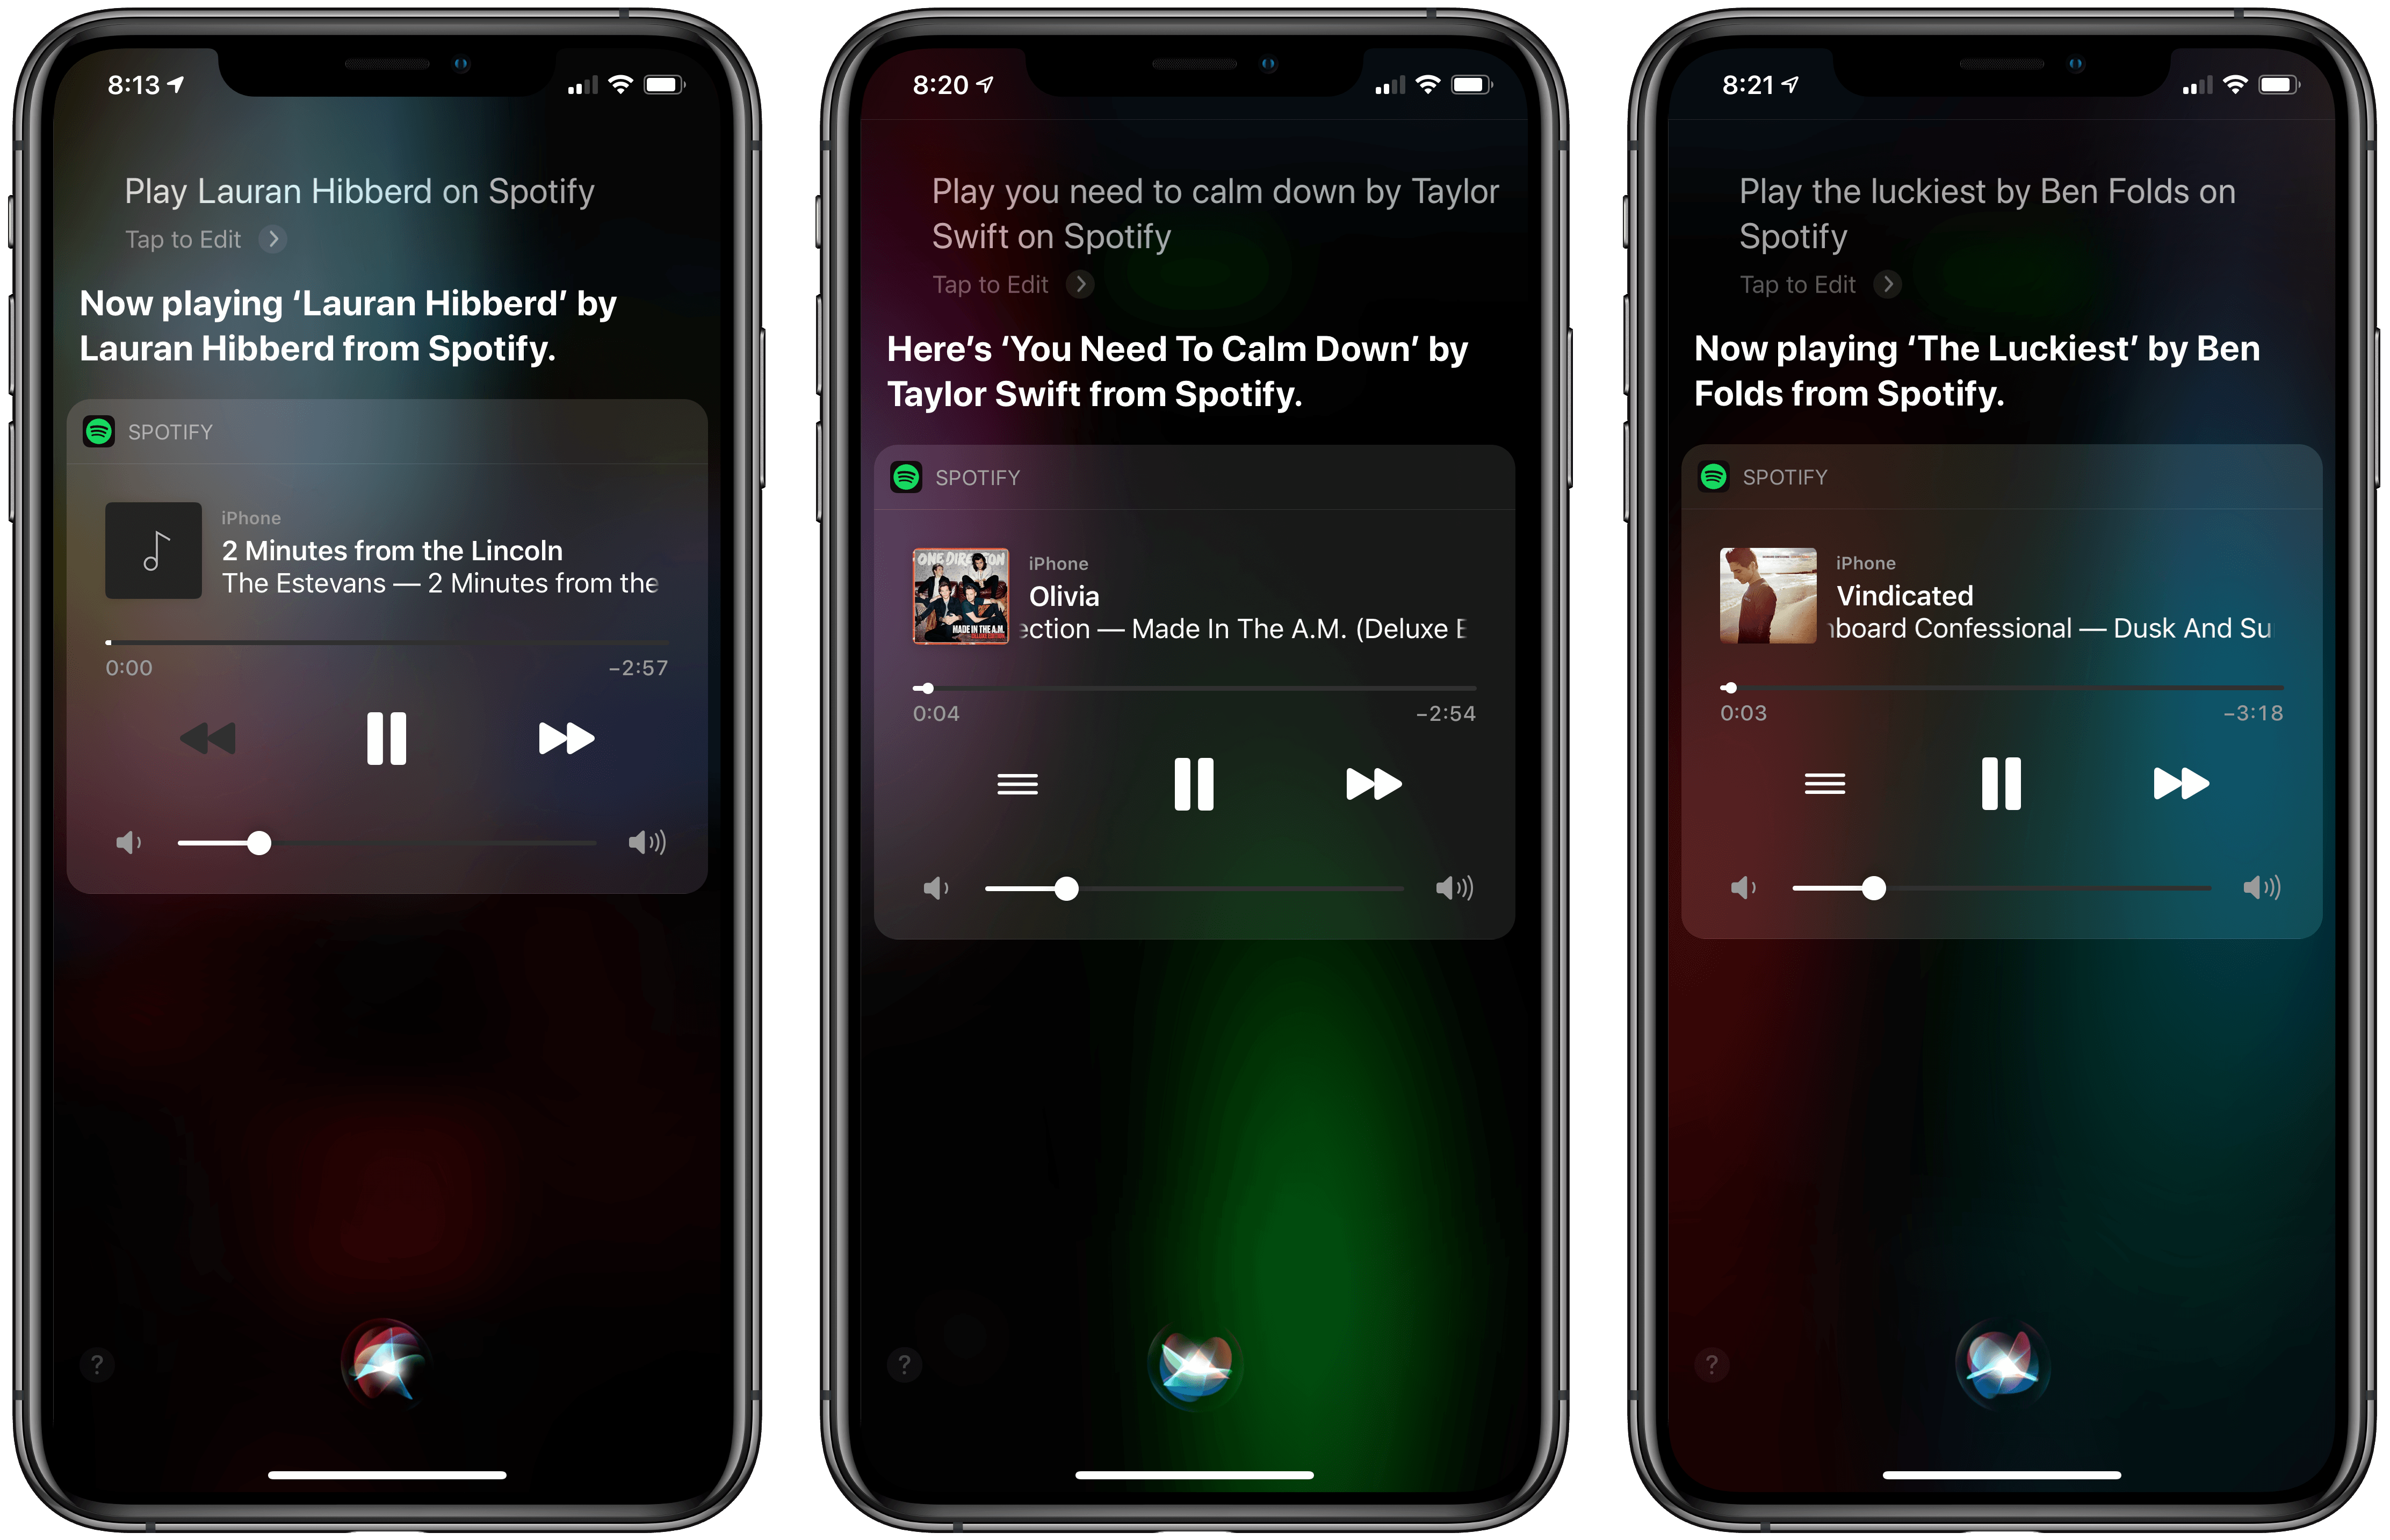 Siri doesn't work with song requests if you're not a premium subscriber, which can be confusing.